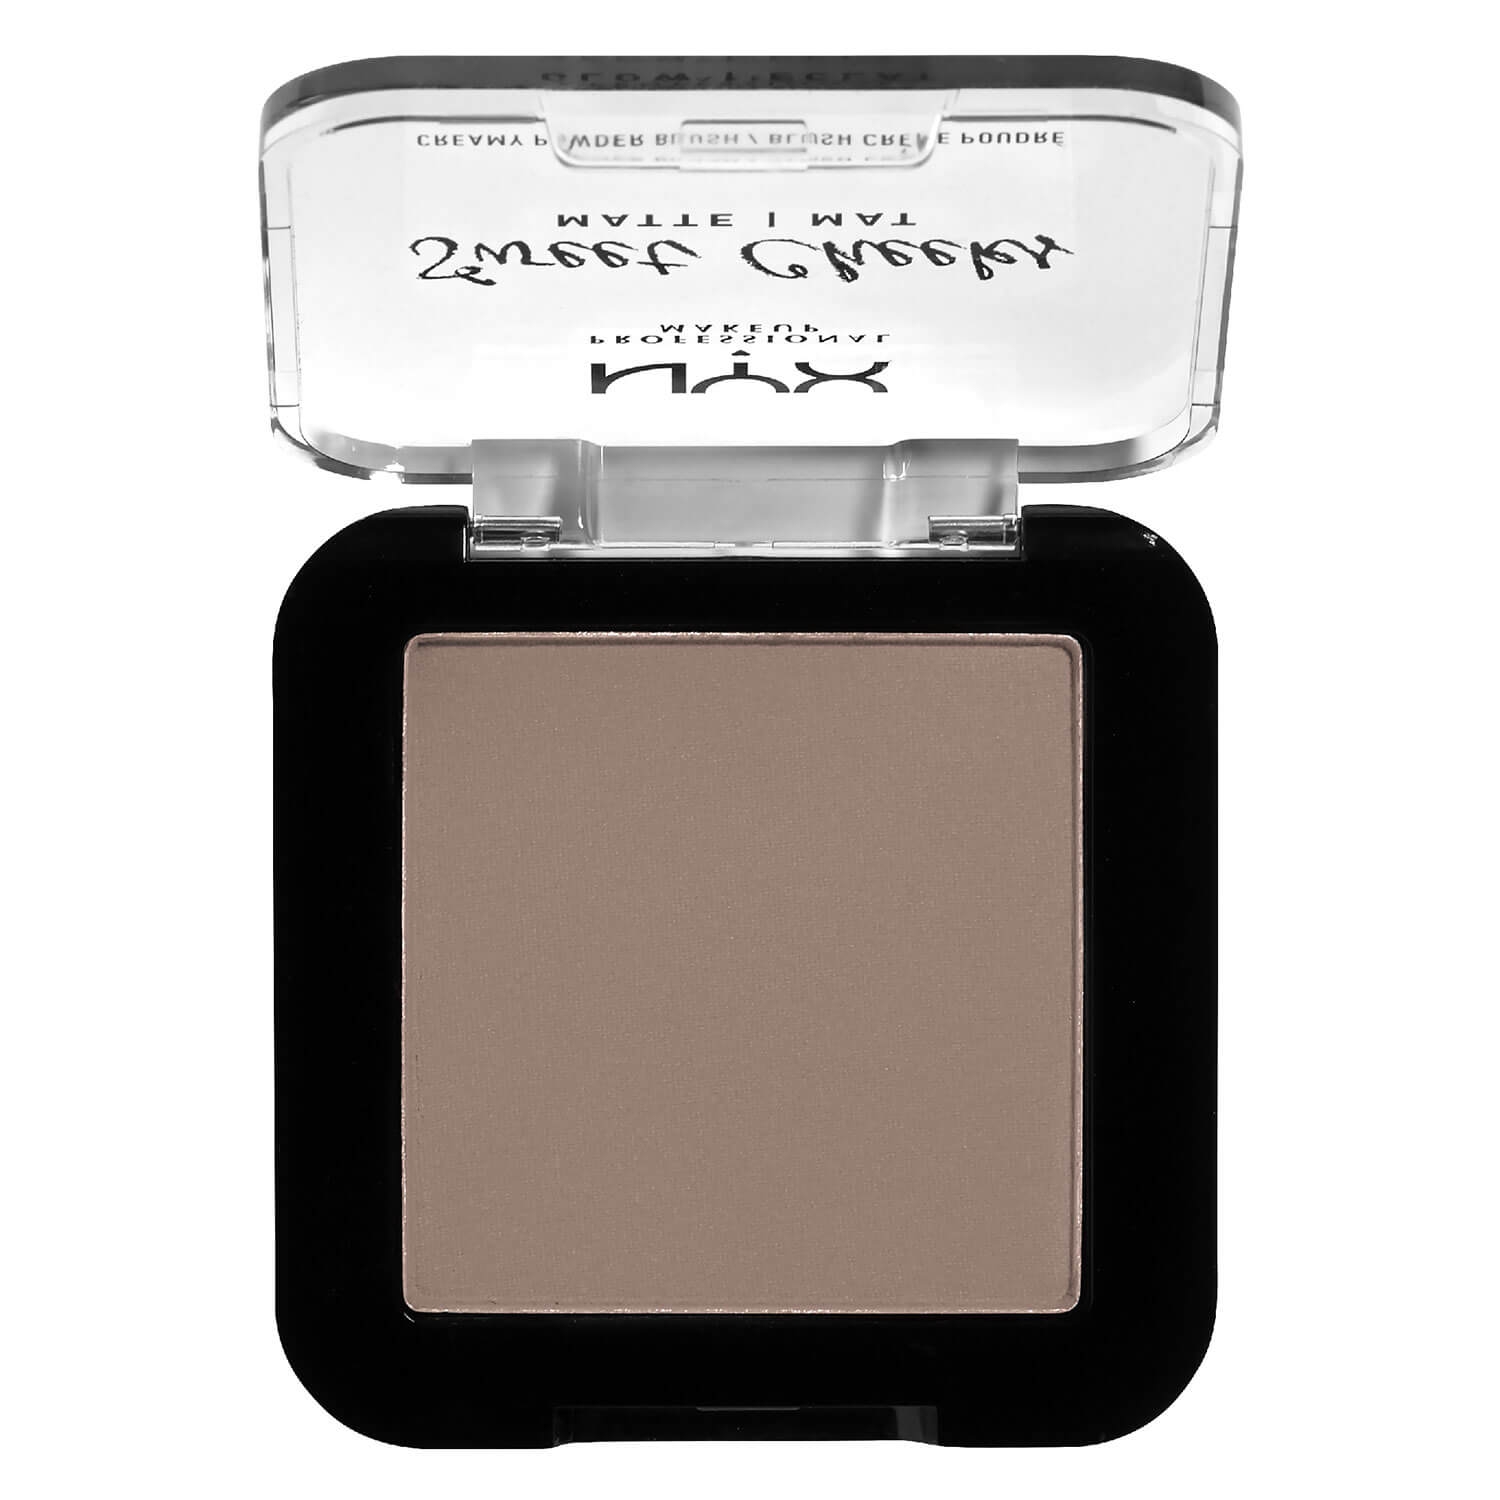 Product image from Sweet Cheeks - Creamy Powder Blush Matte So Taupe